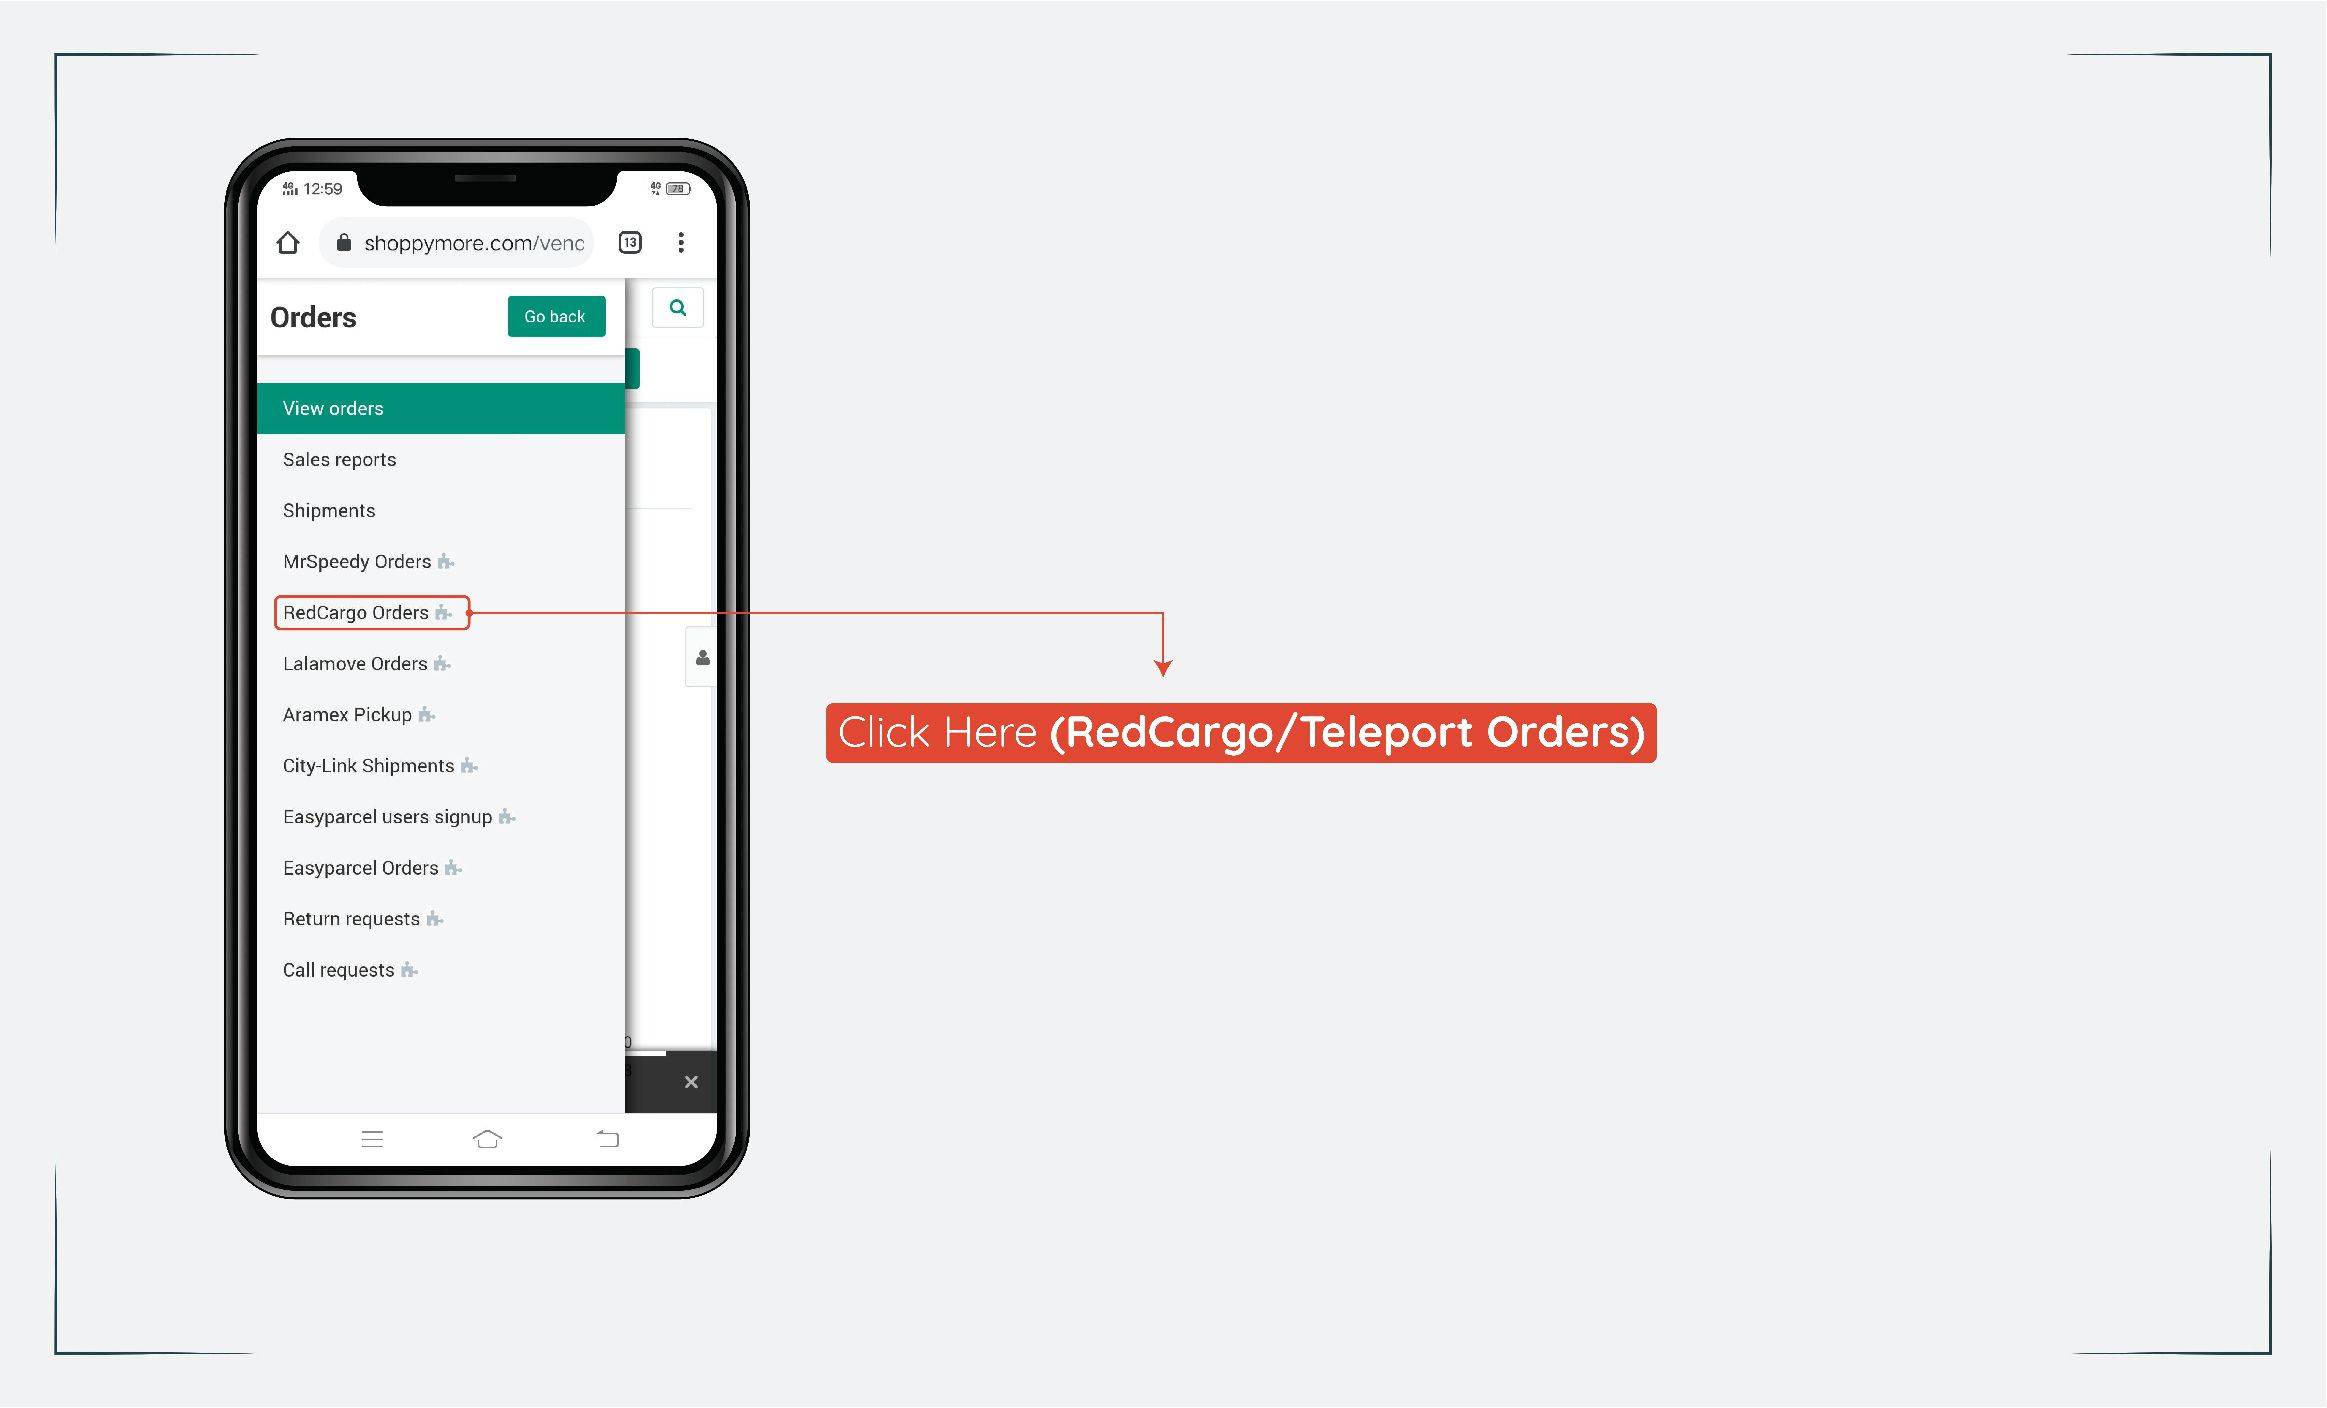 How to use Redcargo/Teleport order handling using mobile 7